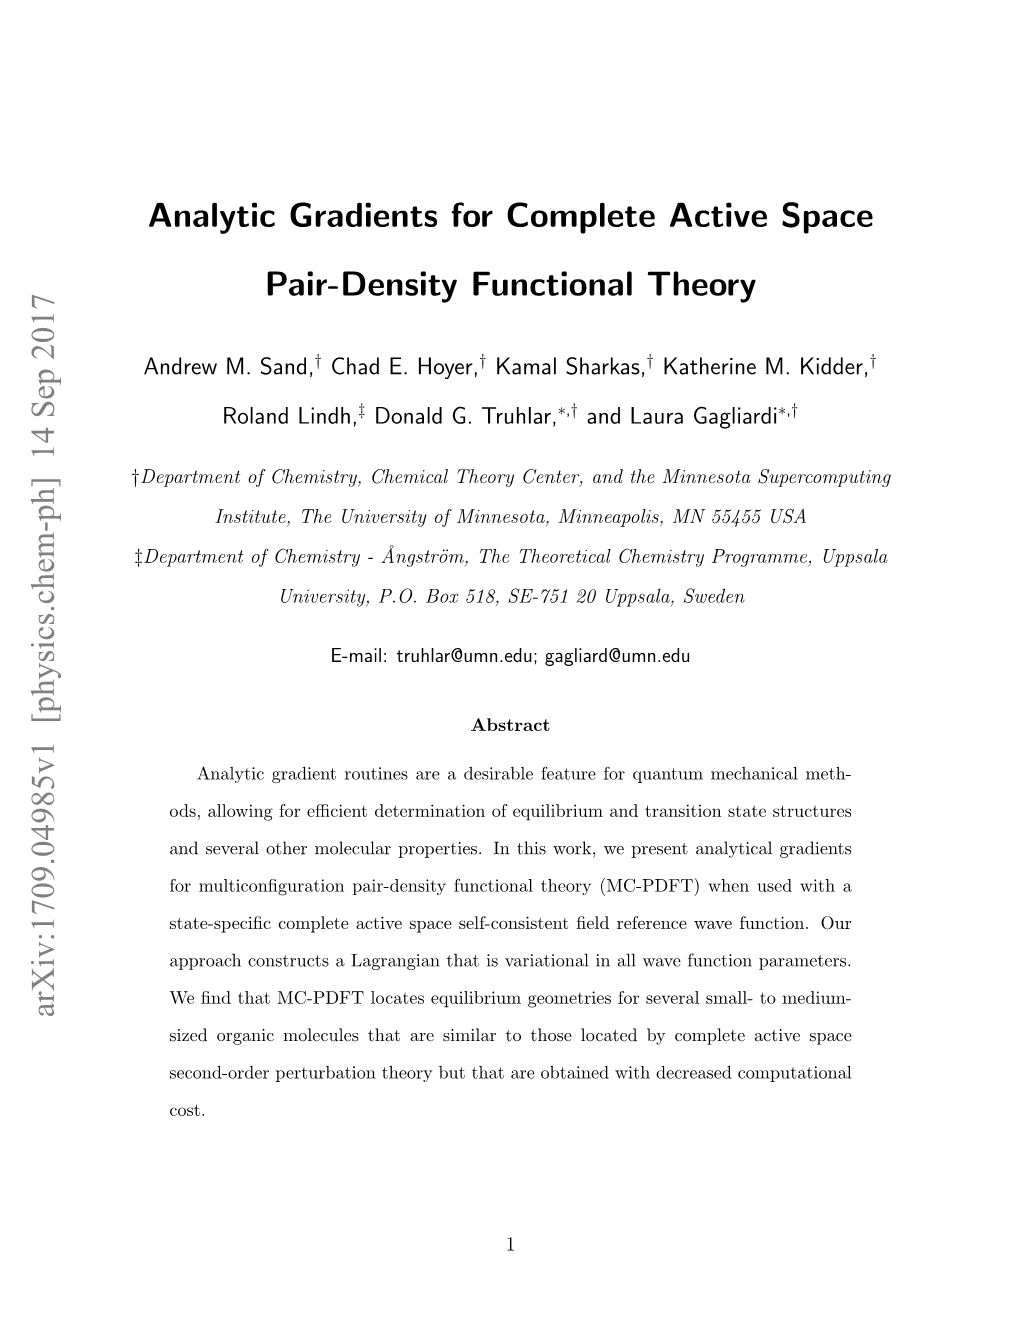 Analytic Gradients for Complete Active Space Pair-Density Functional Theory